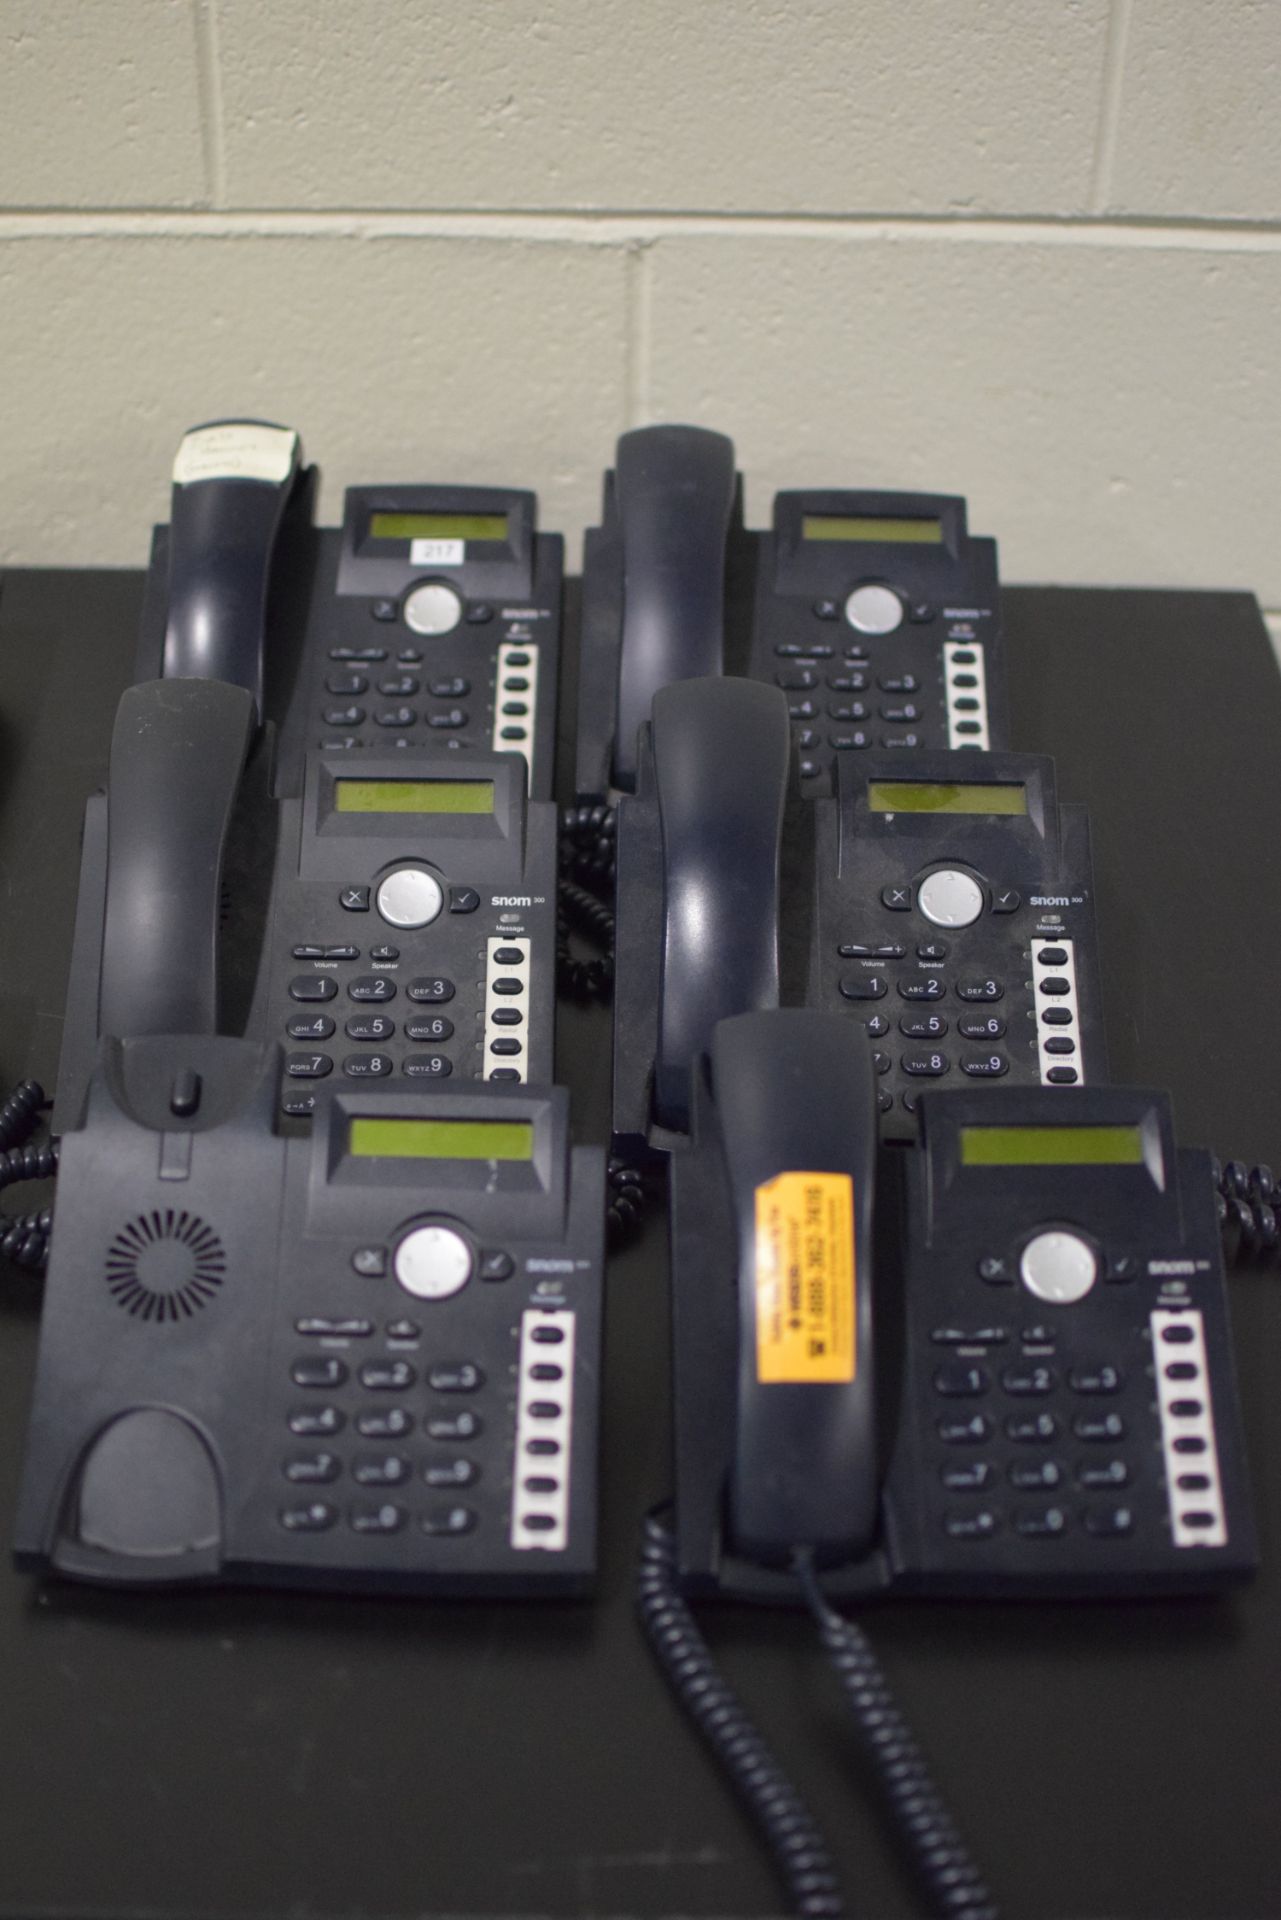 Dell Optiplex 380 Shoretel Tower With Shoretel And Snom Phone Systems - Image 4 of 8